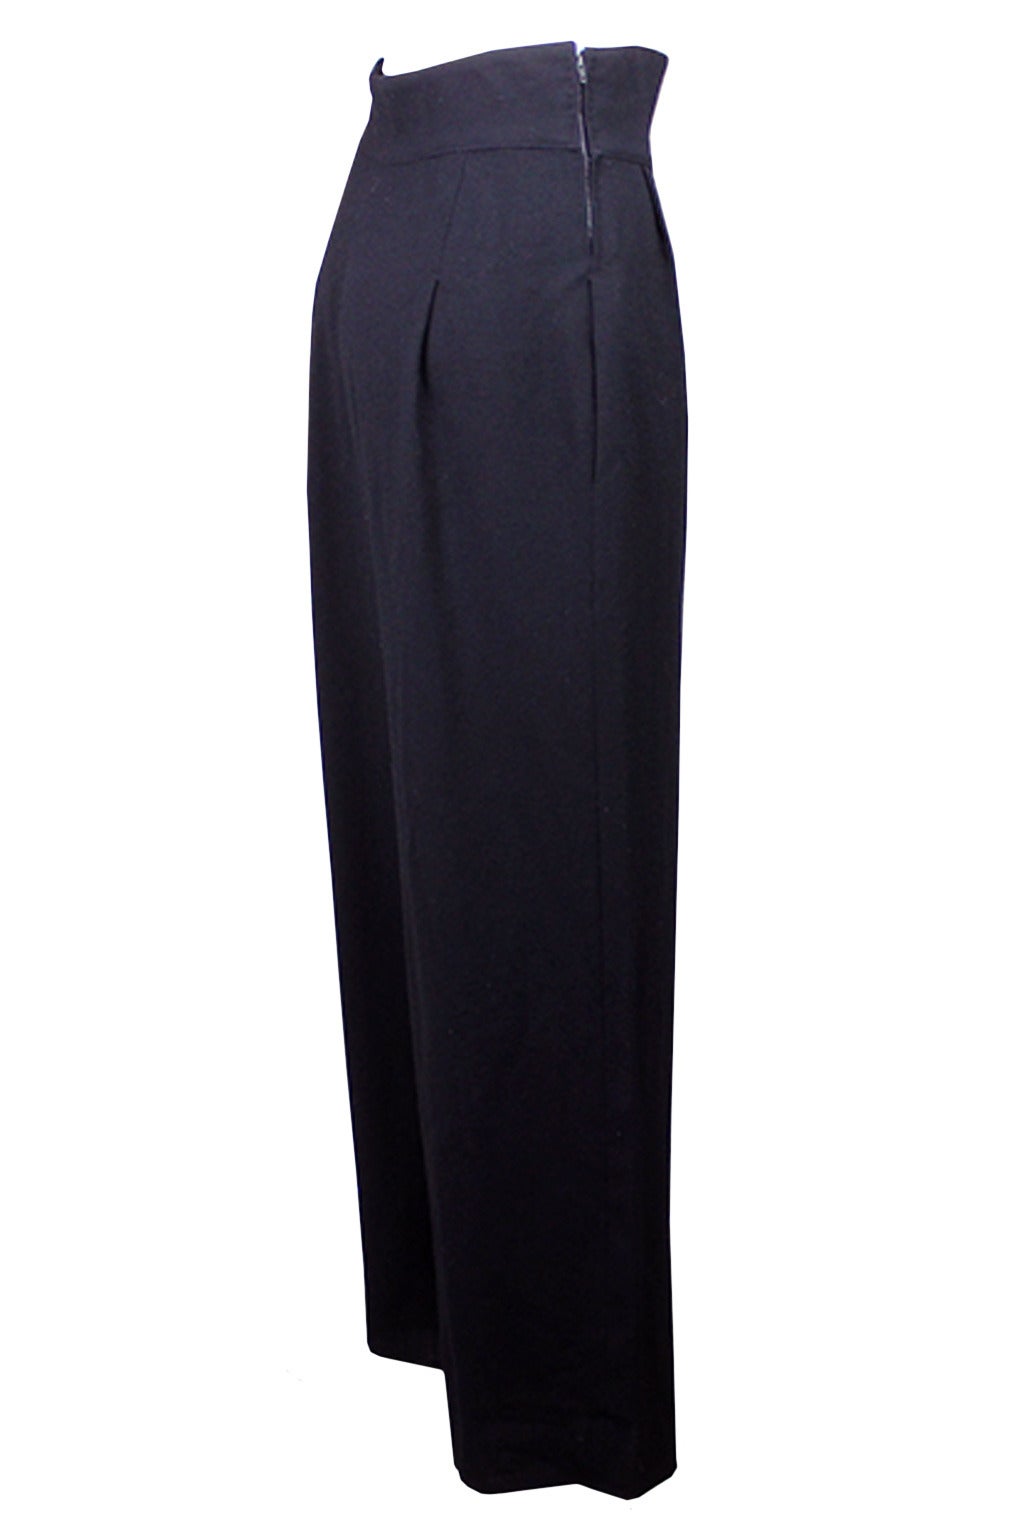 These trousers are beautifully constructed with a flattering line. The high waist is nipped in with a zipper on both sides. The front drapes in three dropped pleats and have deep side pockets. The leg is full and falls straight without a crease.